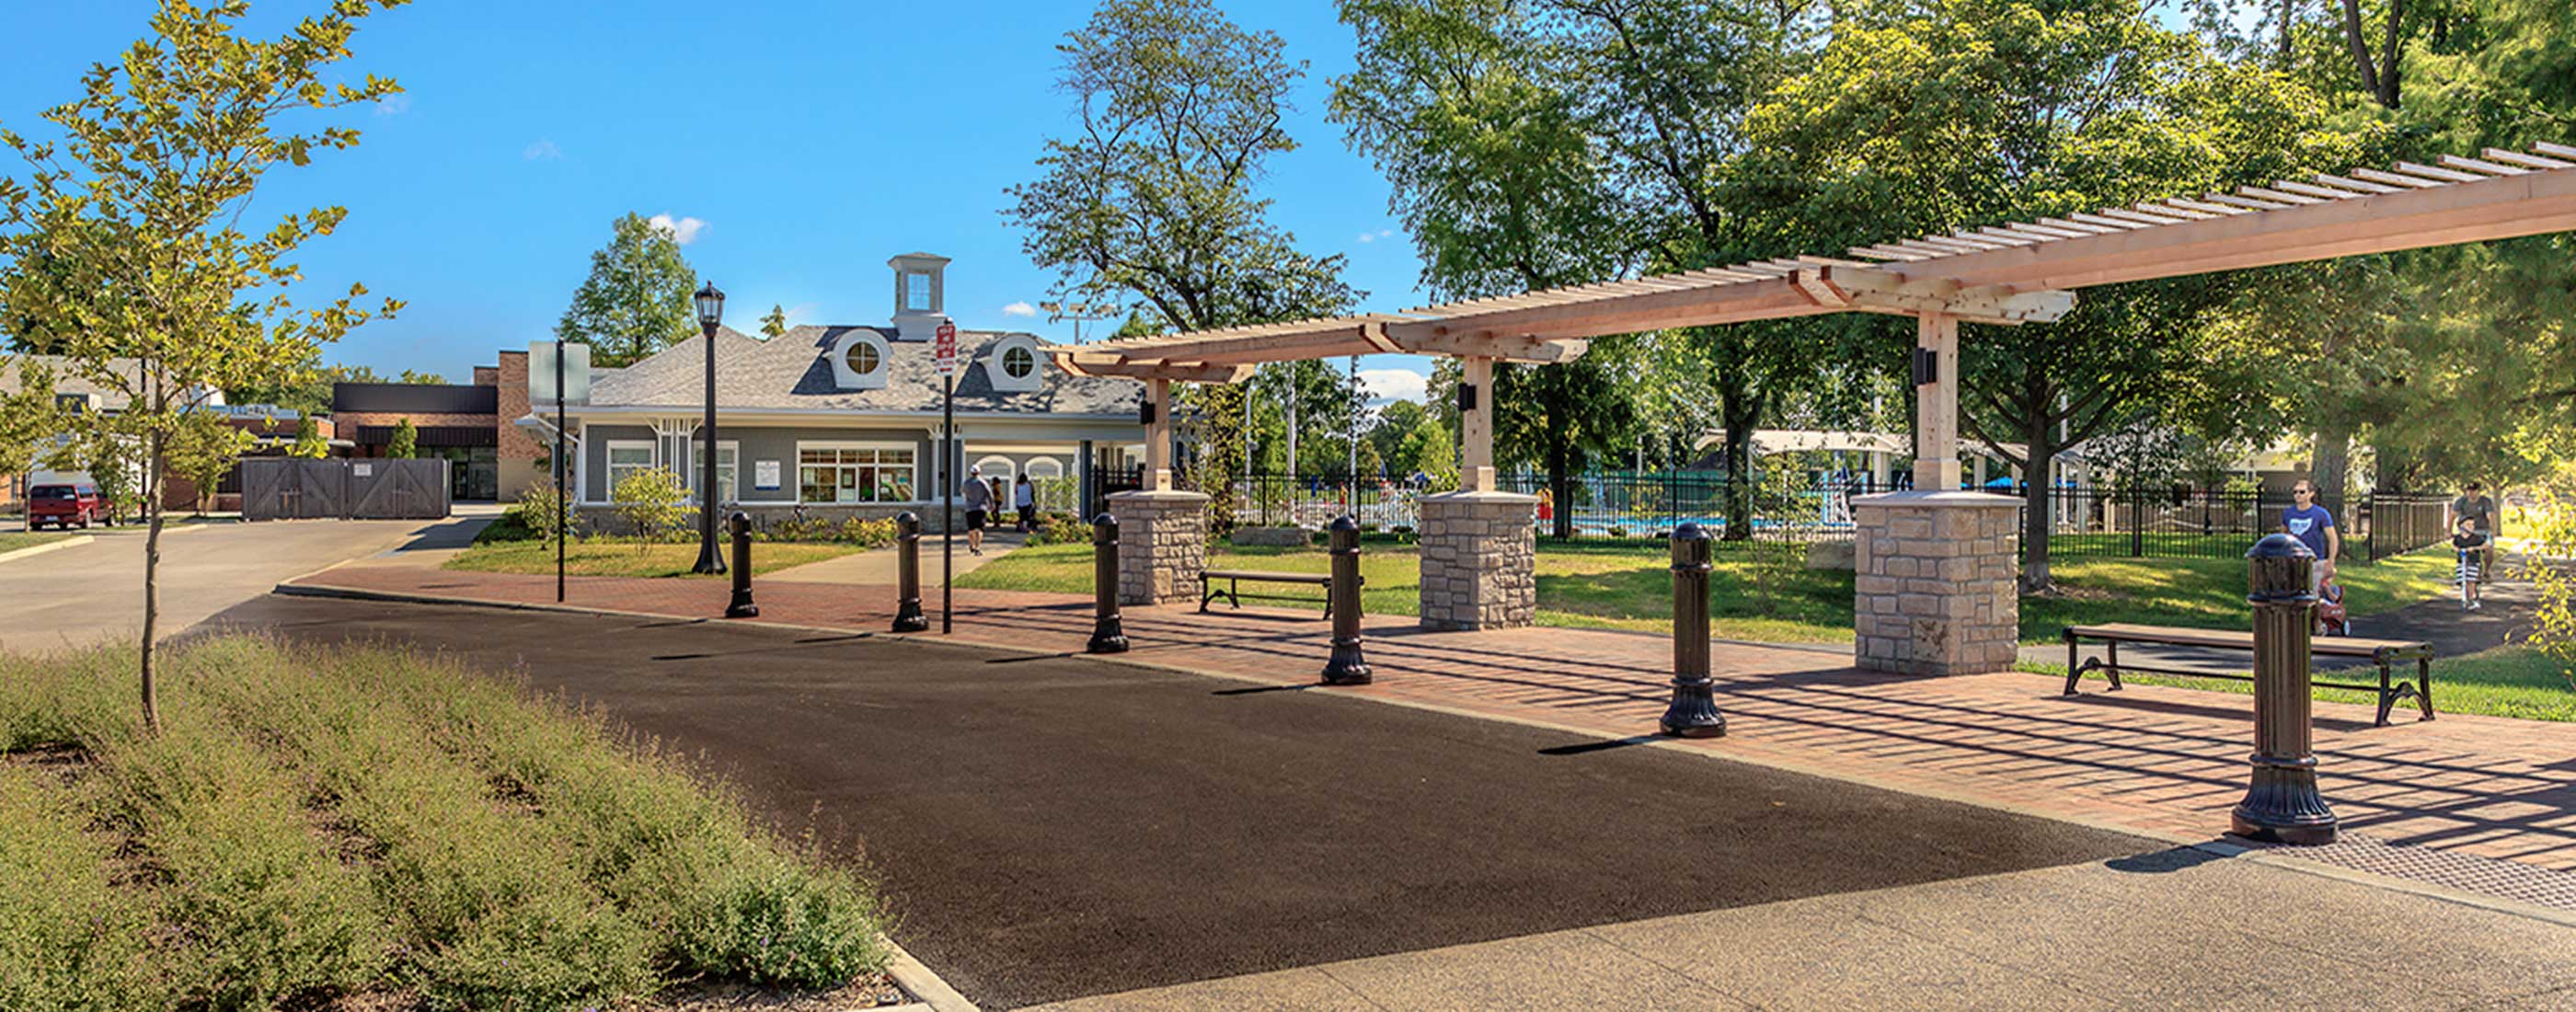 OHM Advisors helped design a promenade and connected walkways at Northam Park.